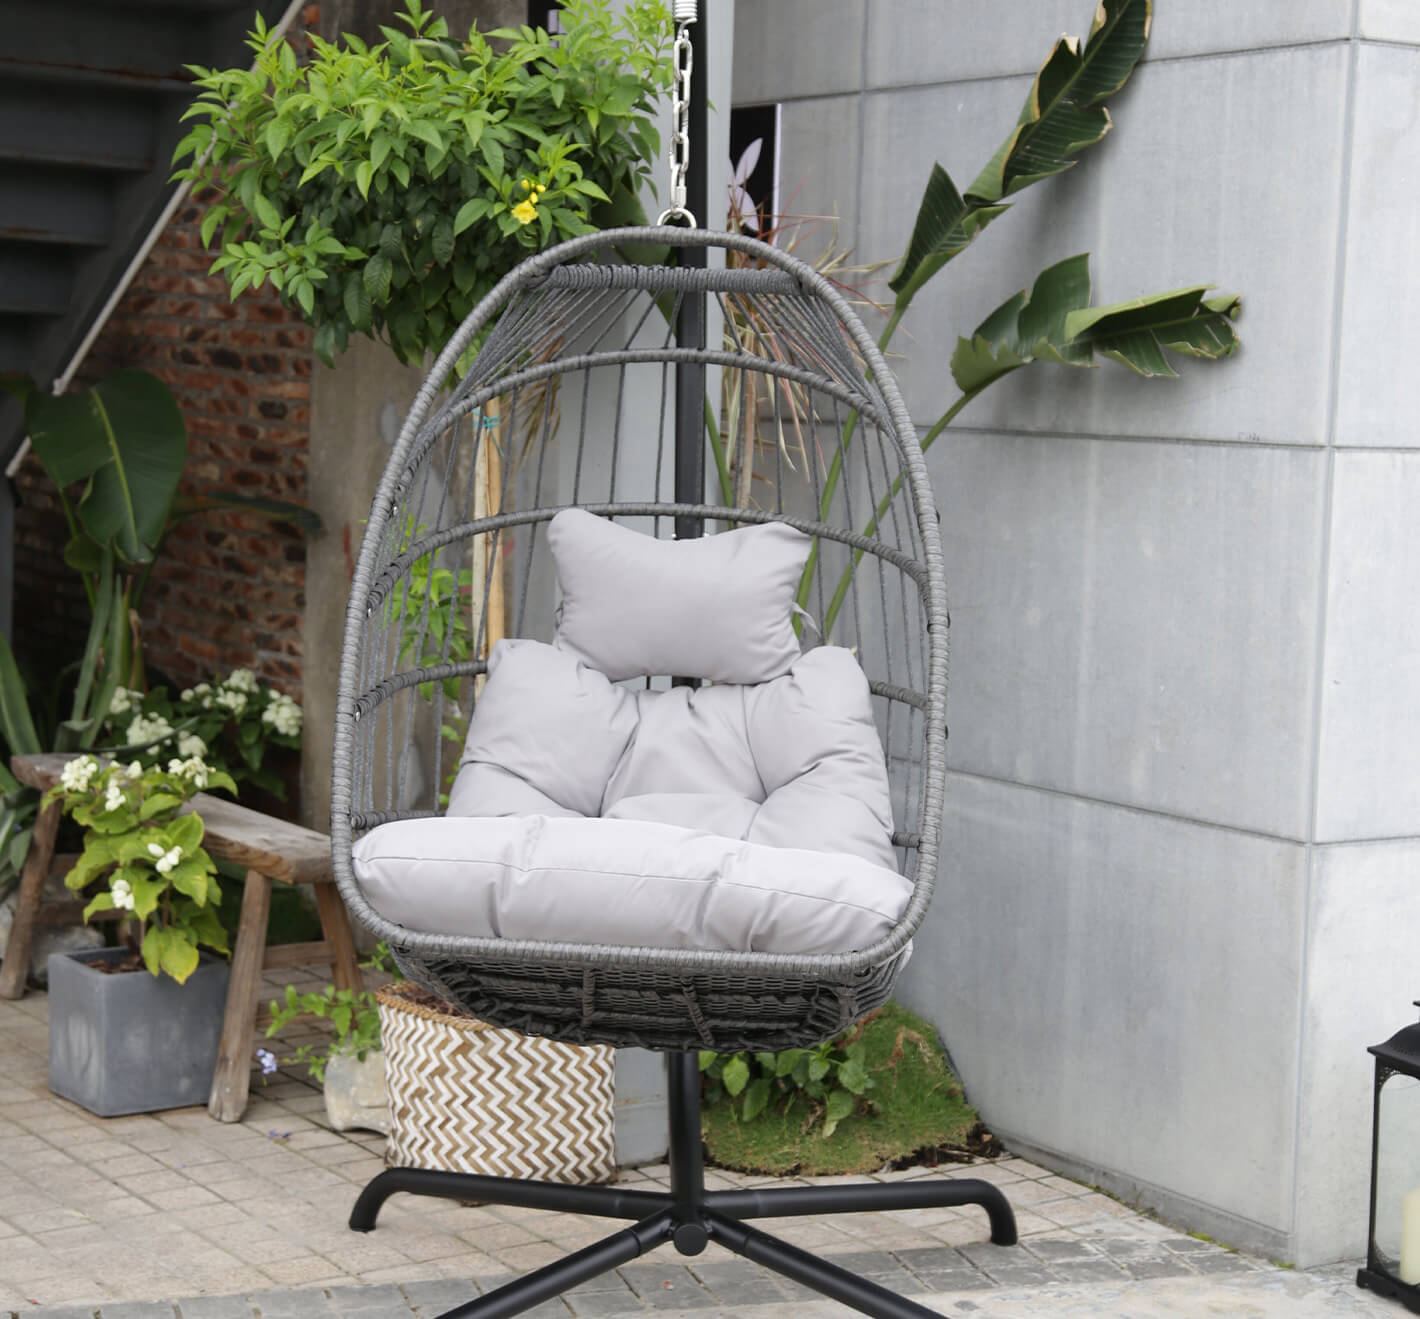 egg chairs outdoor furniture